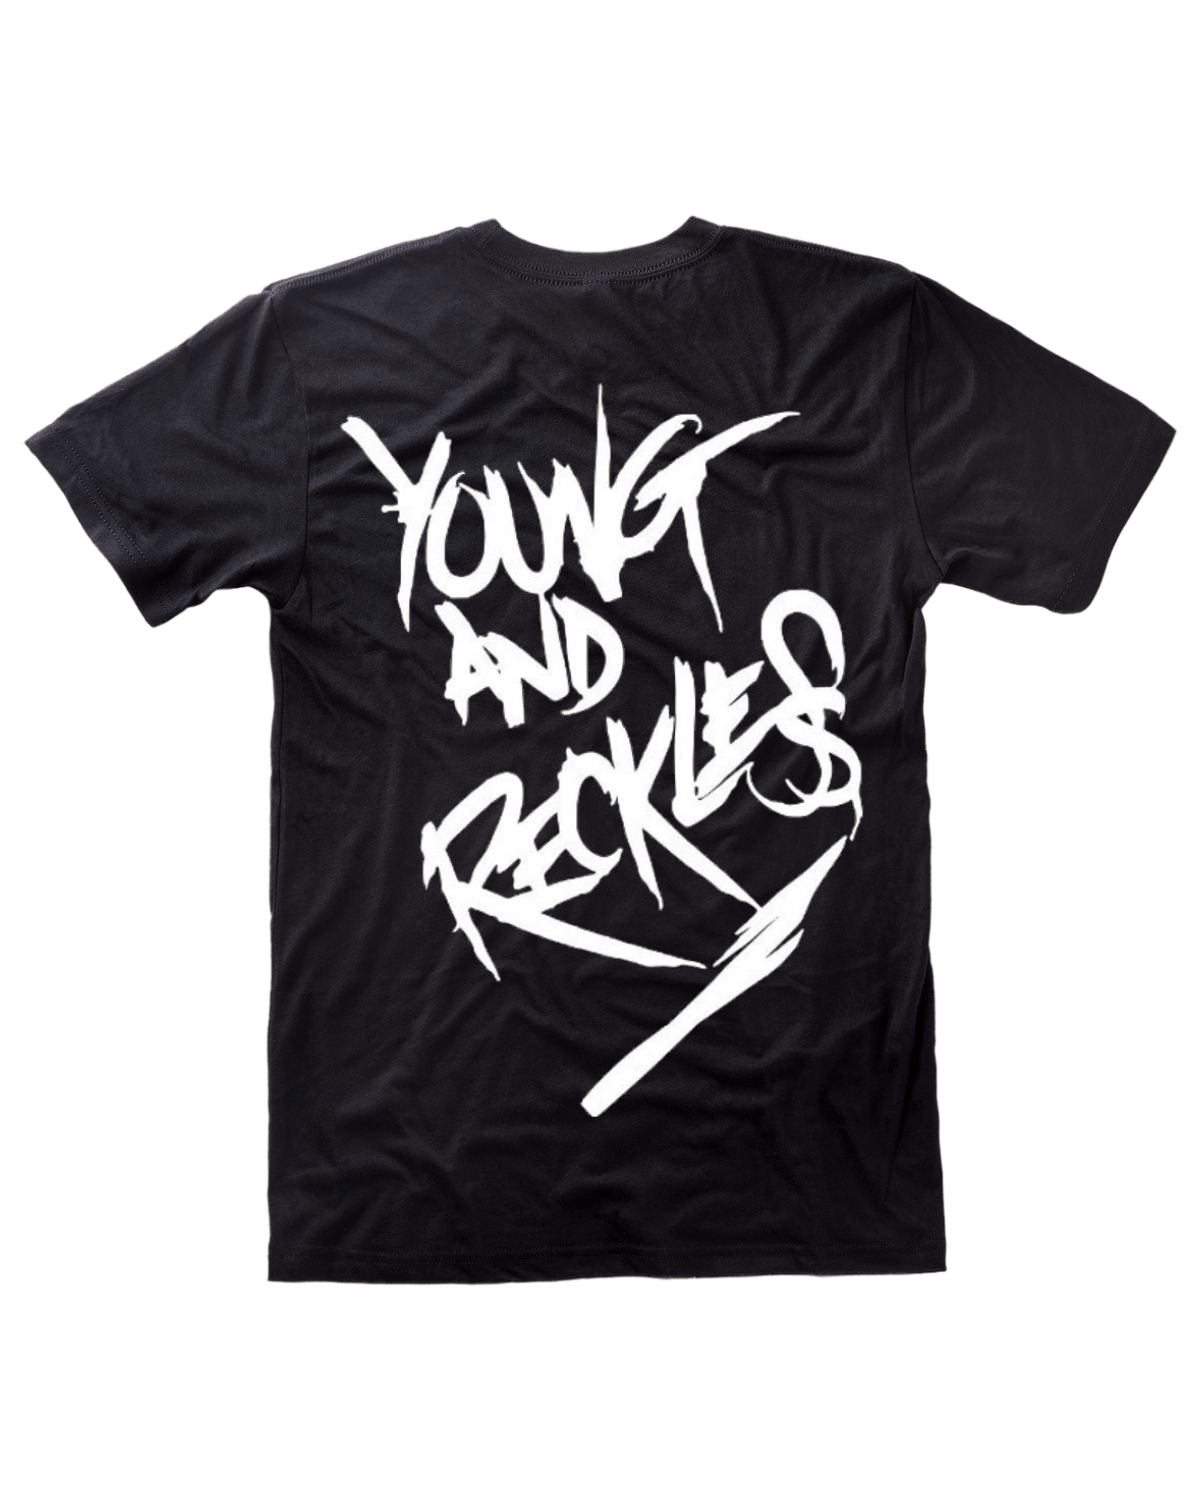 Young and Reckless' tee (Clr)